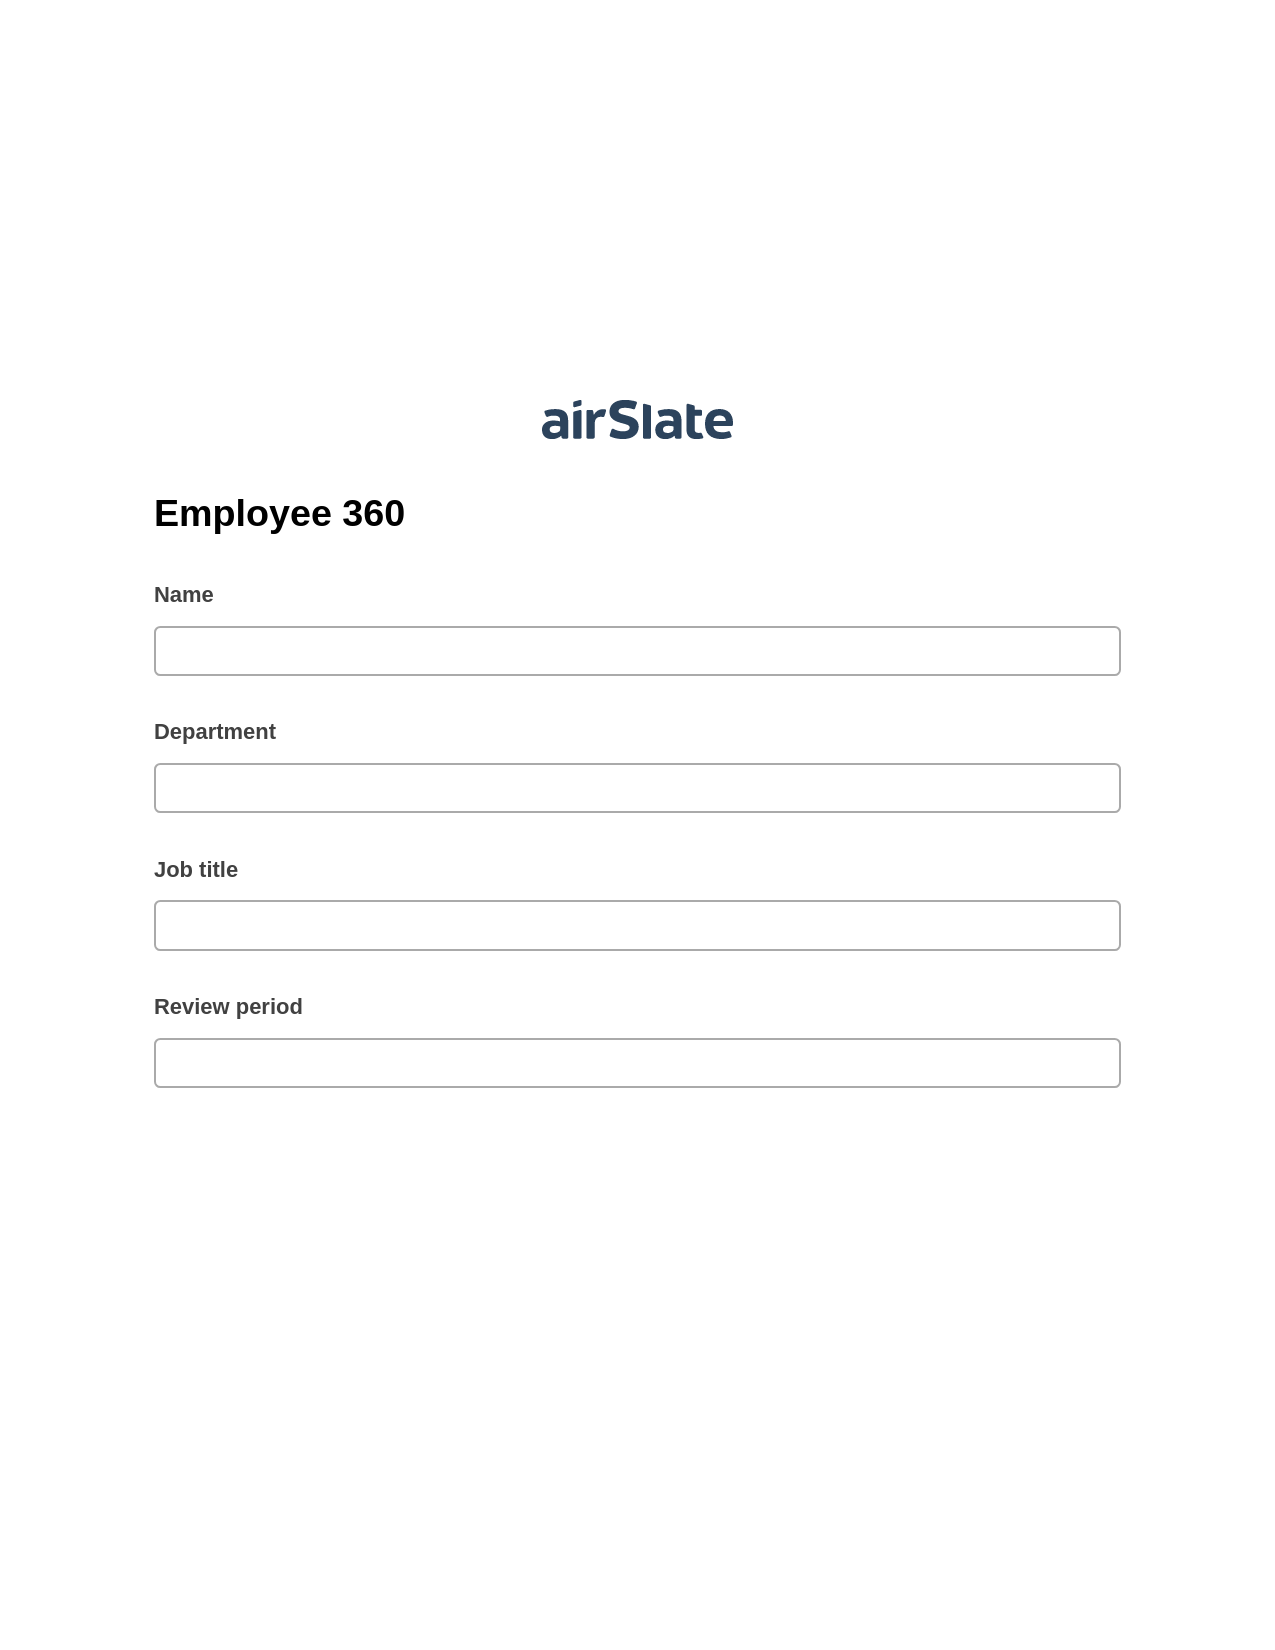 Employee 360 Pre-fill Dropdowns from Excel Bot, Invoke Salesforce Process Bot, Export to WebMerge Bot